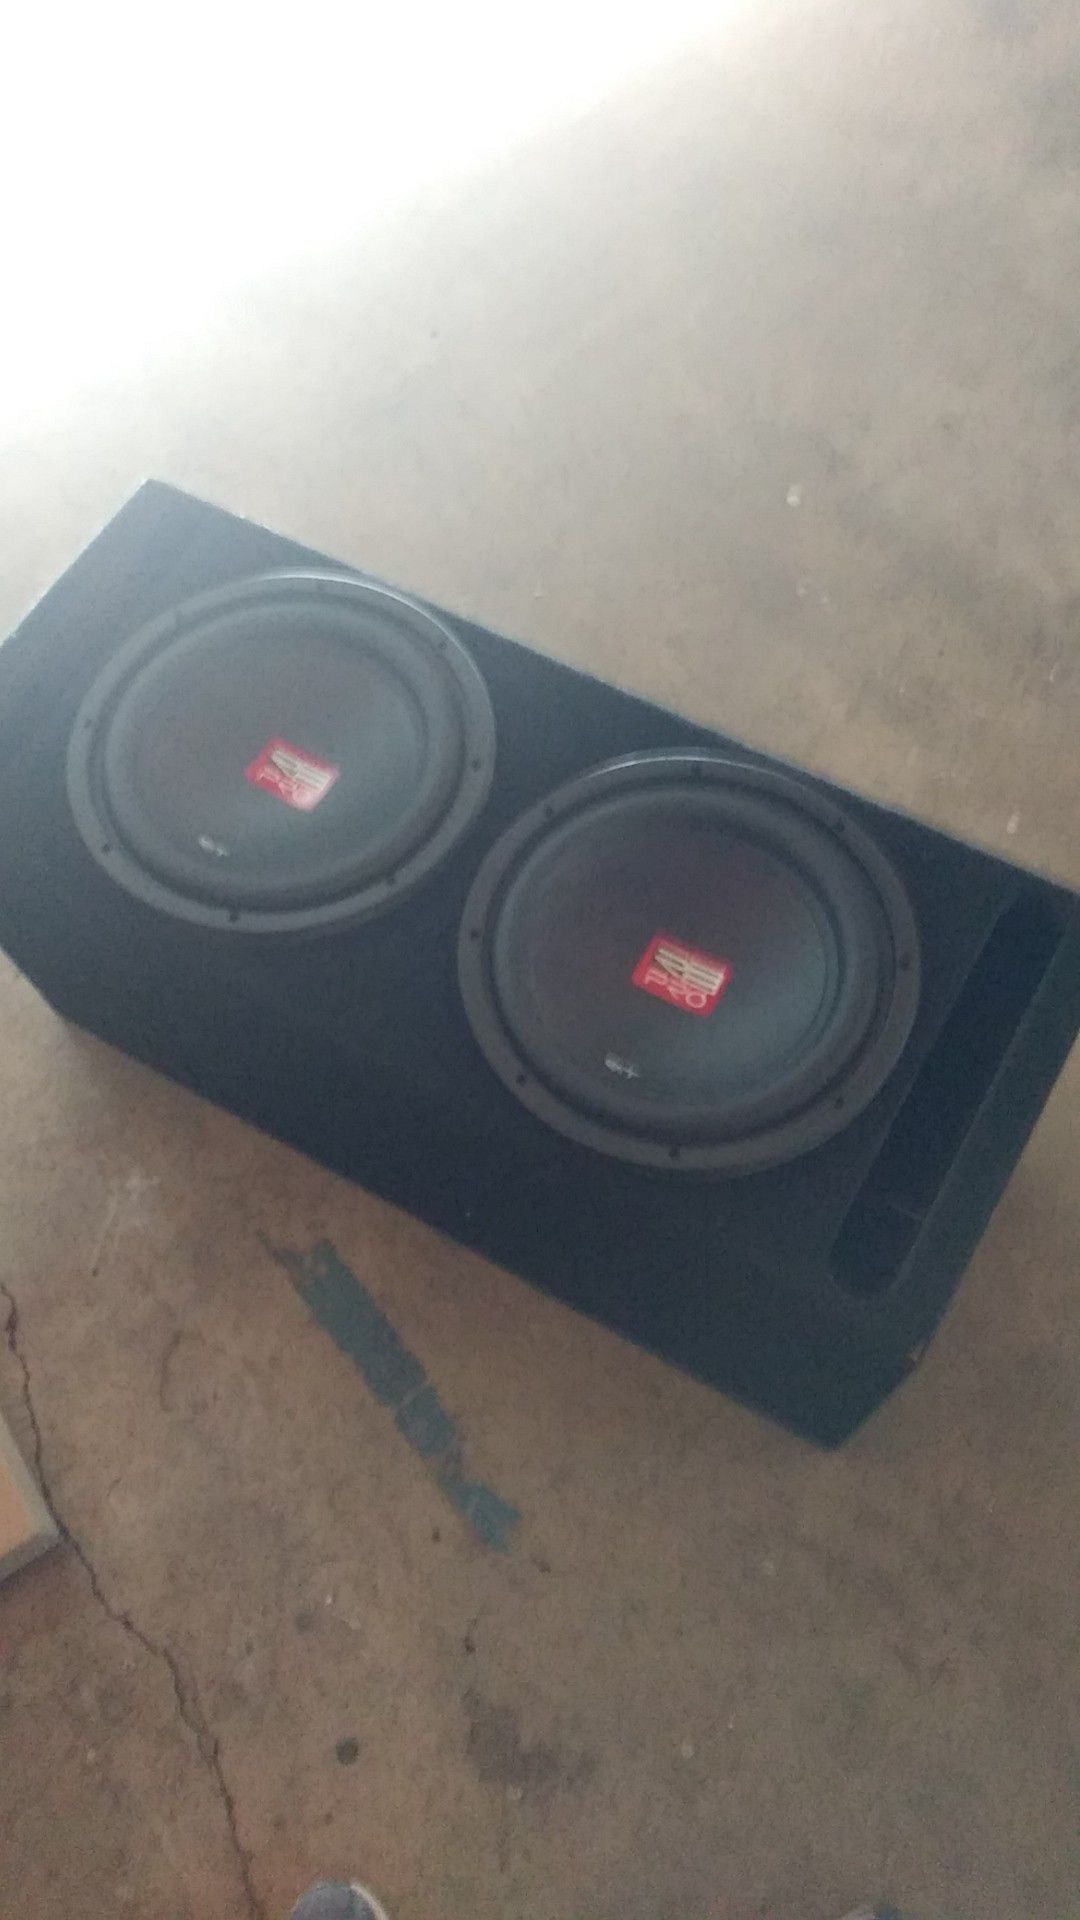 R3 audio-RT PRO 12" subwoofers in box